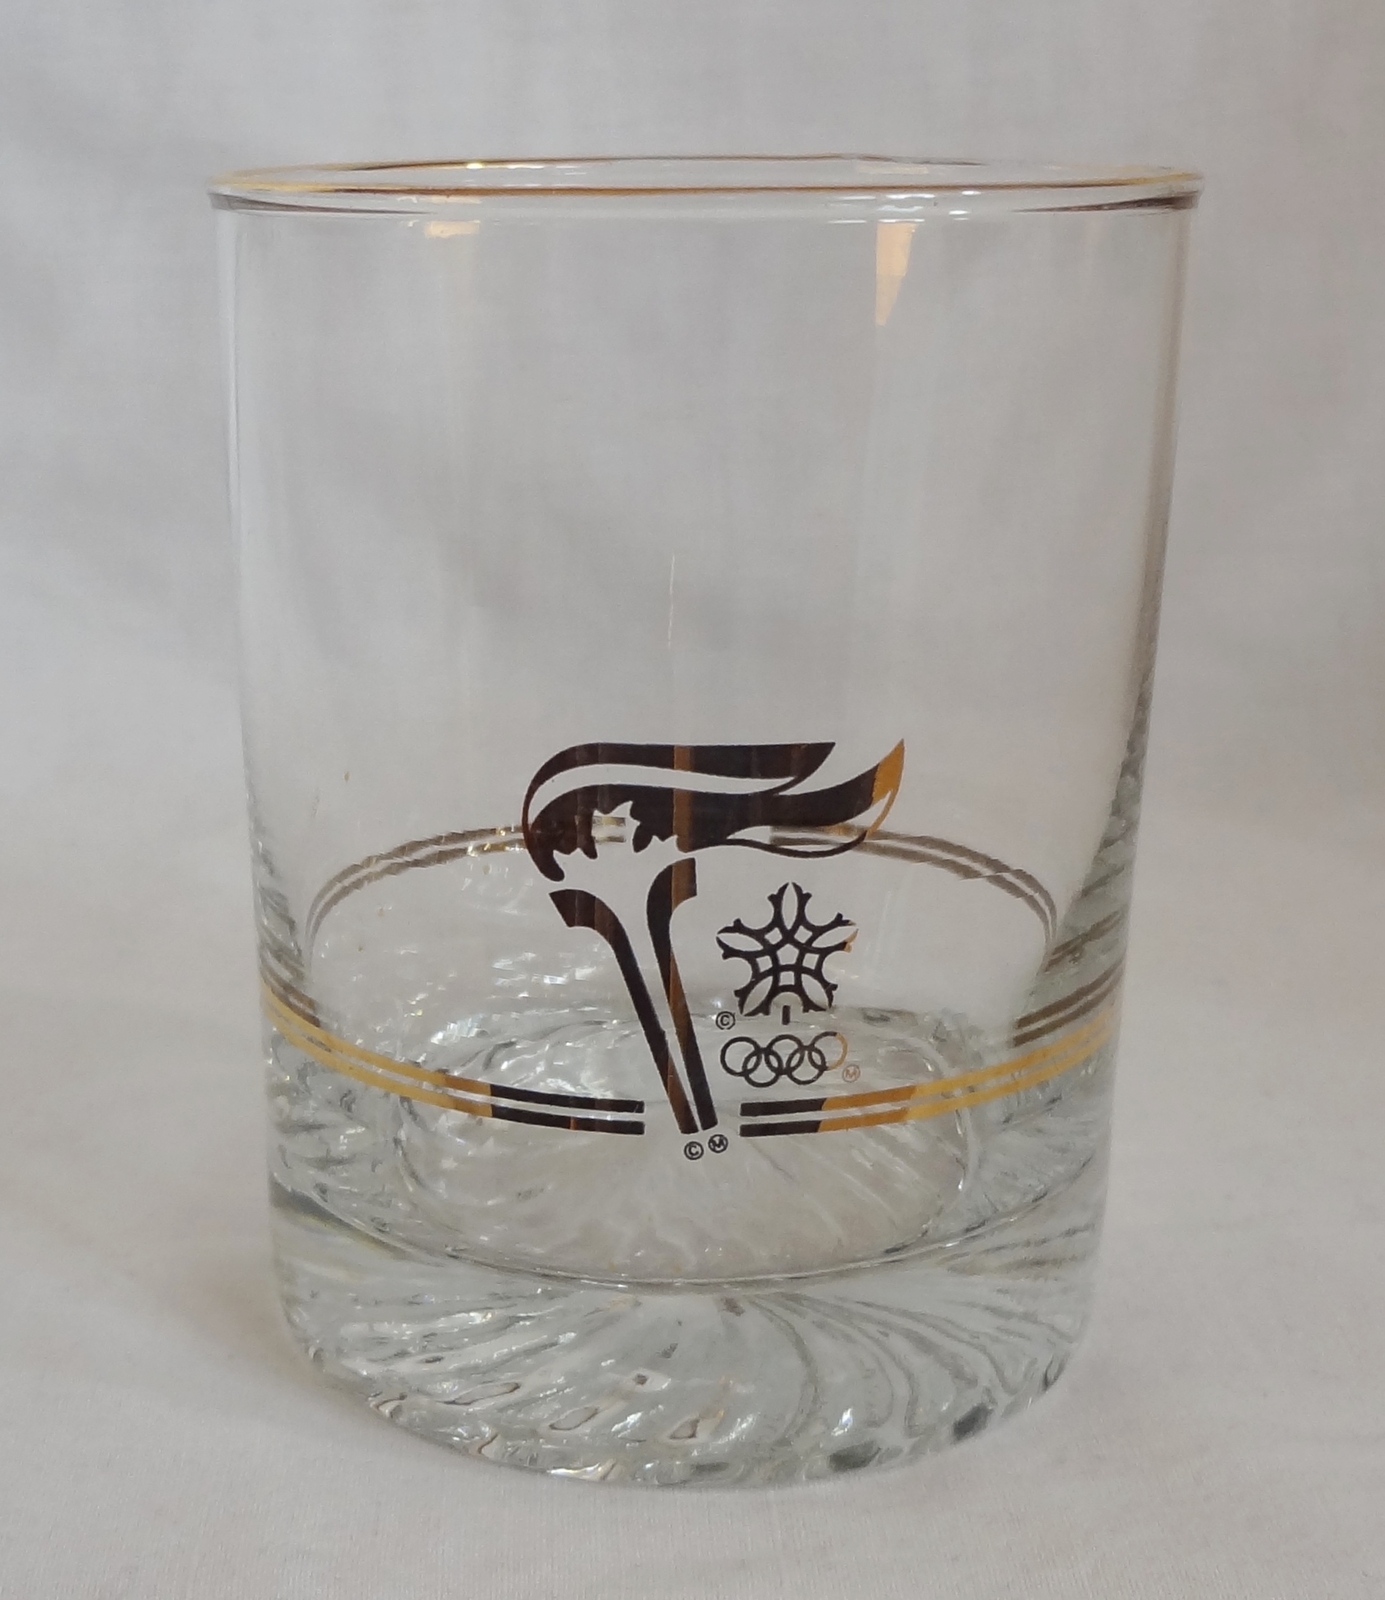 Olympic Torch 10 oz Gold Rimmed Glass Tumbler - $1.49